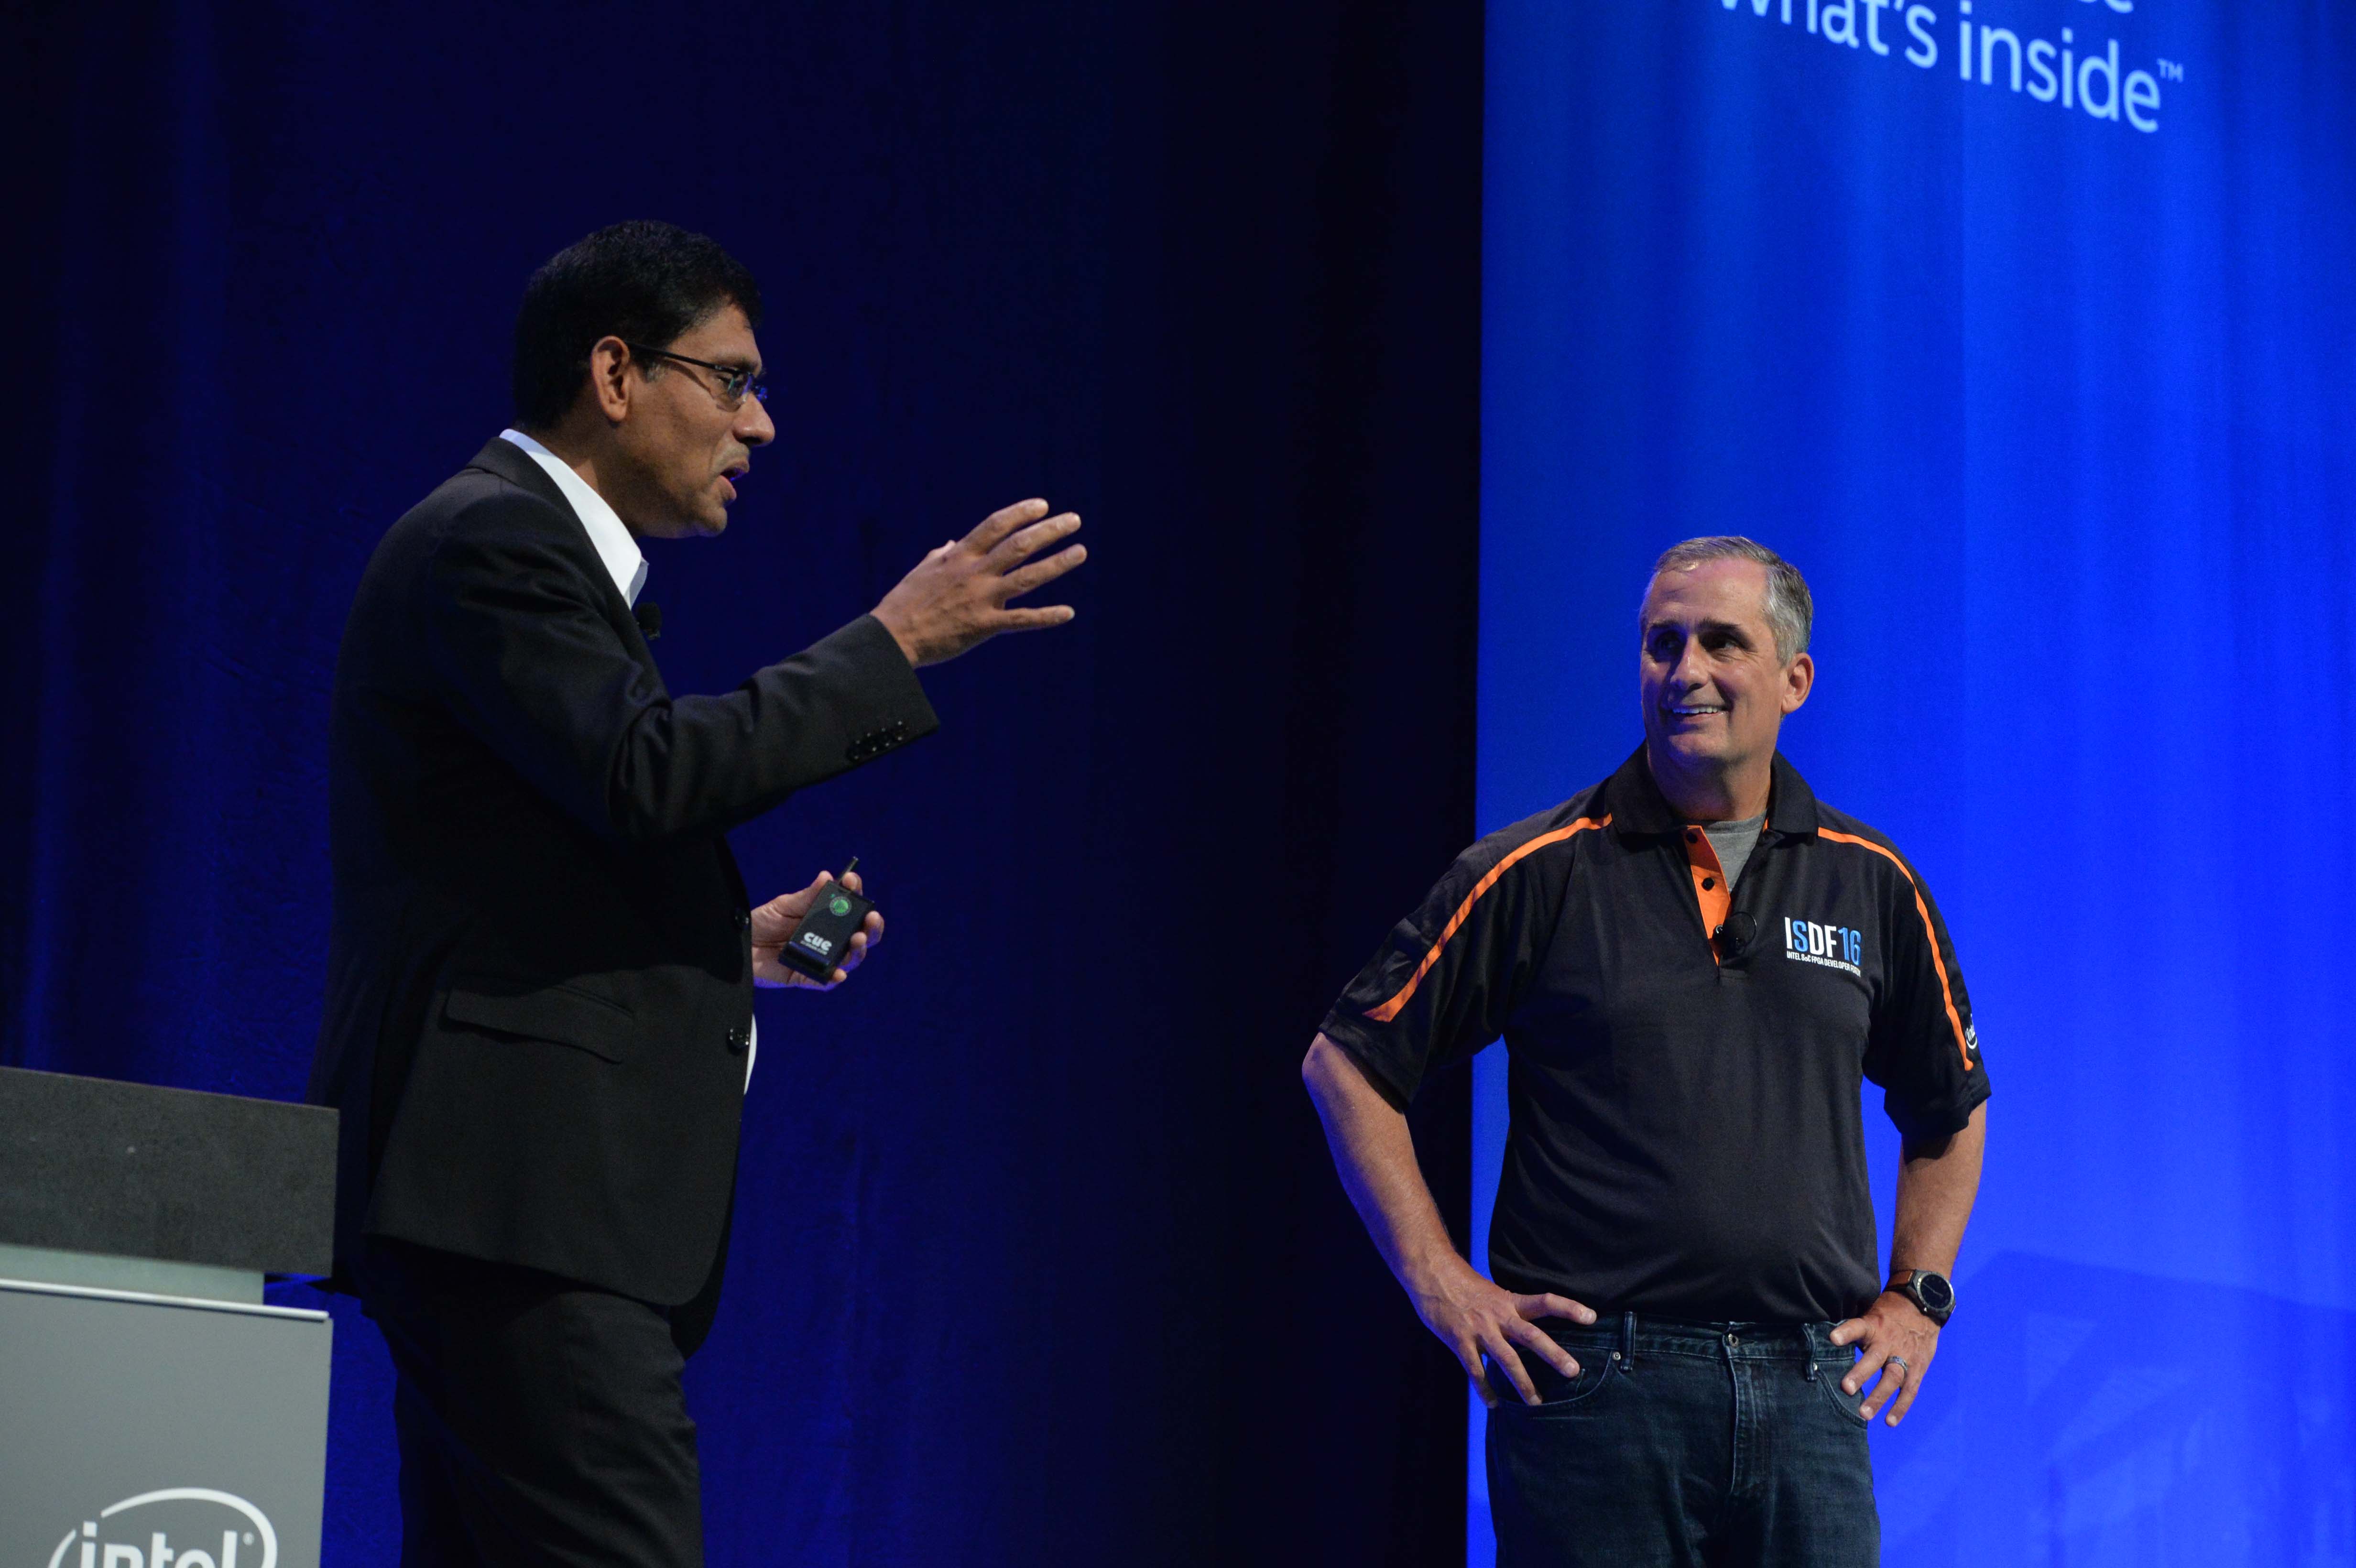 Brian Krzanich, Intel chief executive officer, and Schneider Electric?s chief technology officer Prith Banerjee (right) highlight the value of Intel?s FPGAs and SoC FPGAs within Industrial IoT systems at the inaugural Intel SoC FPGA Developer Forum in San Francisco on Thursday, Aug. 18, 2016. (Credit: Intel Corporation)